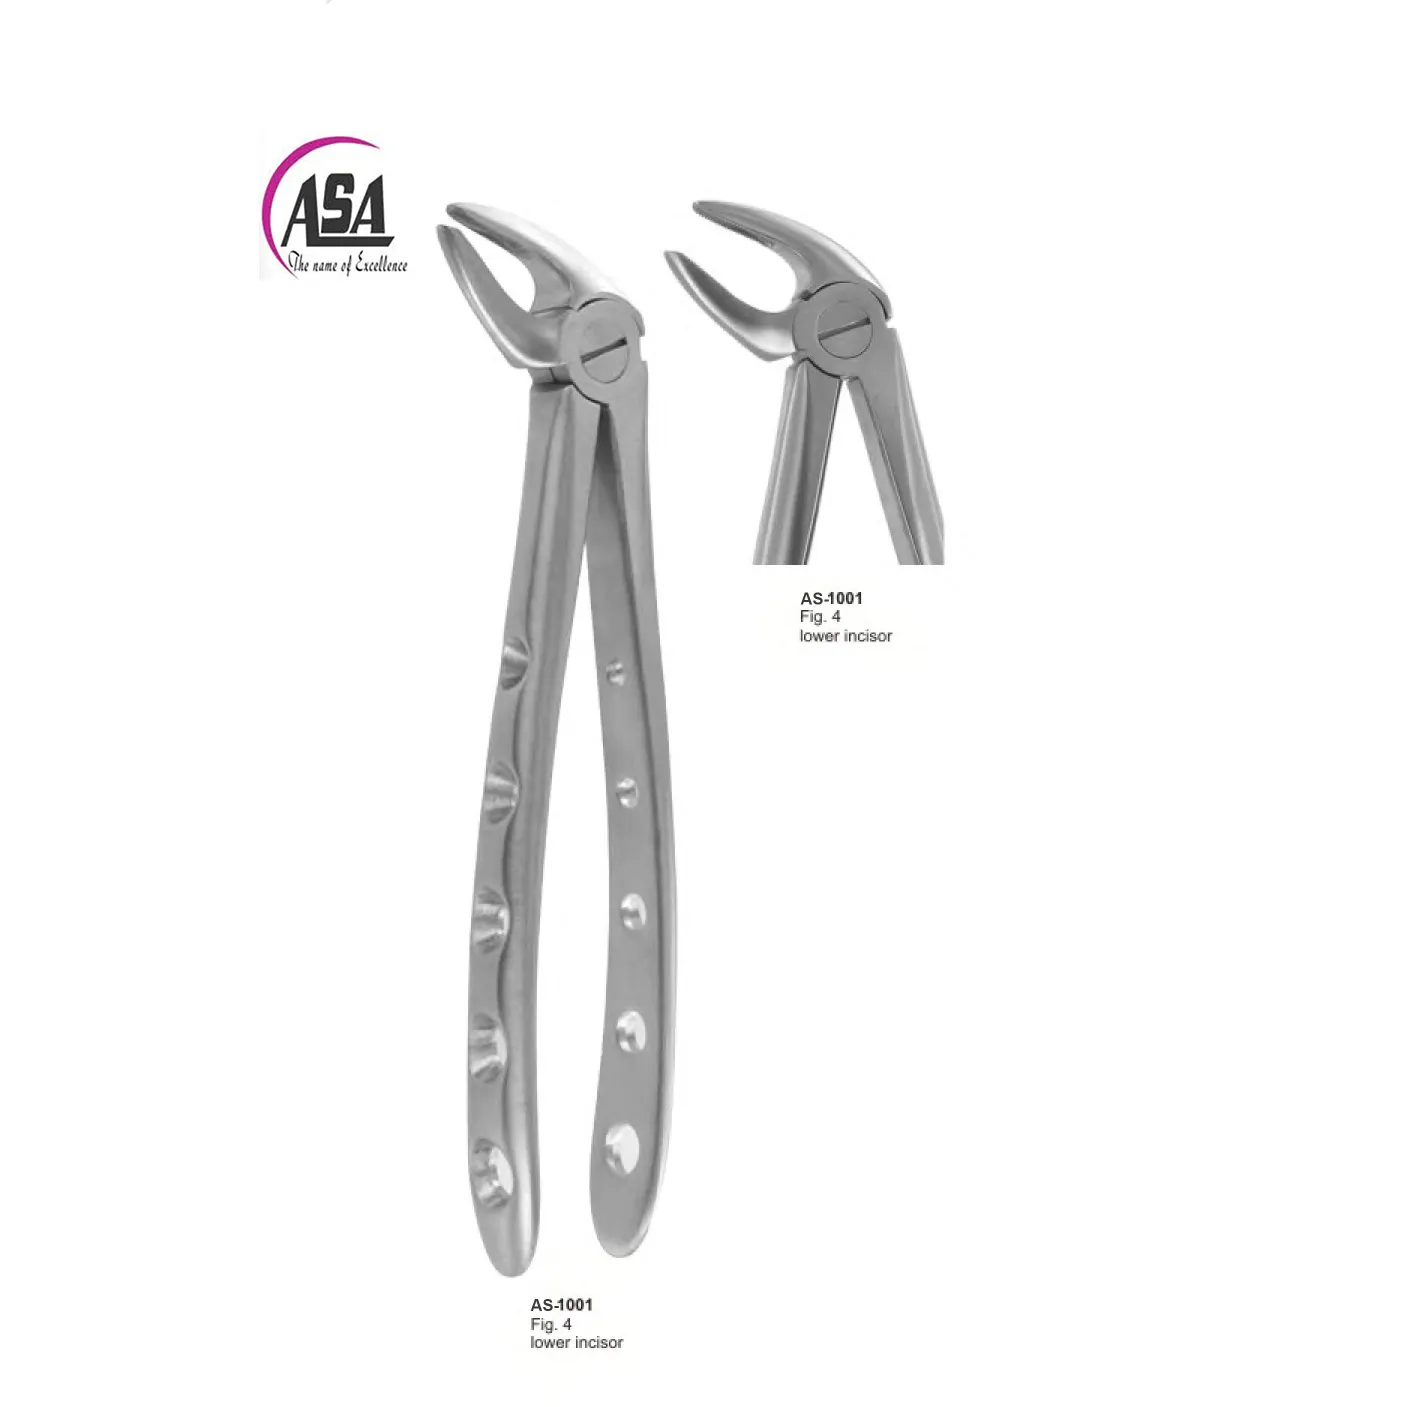 Lowe Incisor Hot Selling Premium Export Quality Dental Instruments Adult Tooth Extracting Forceps English Pattern